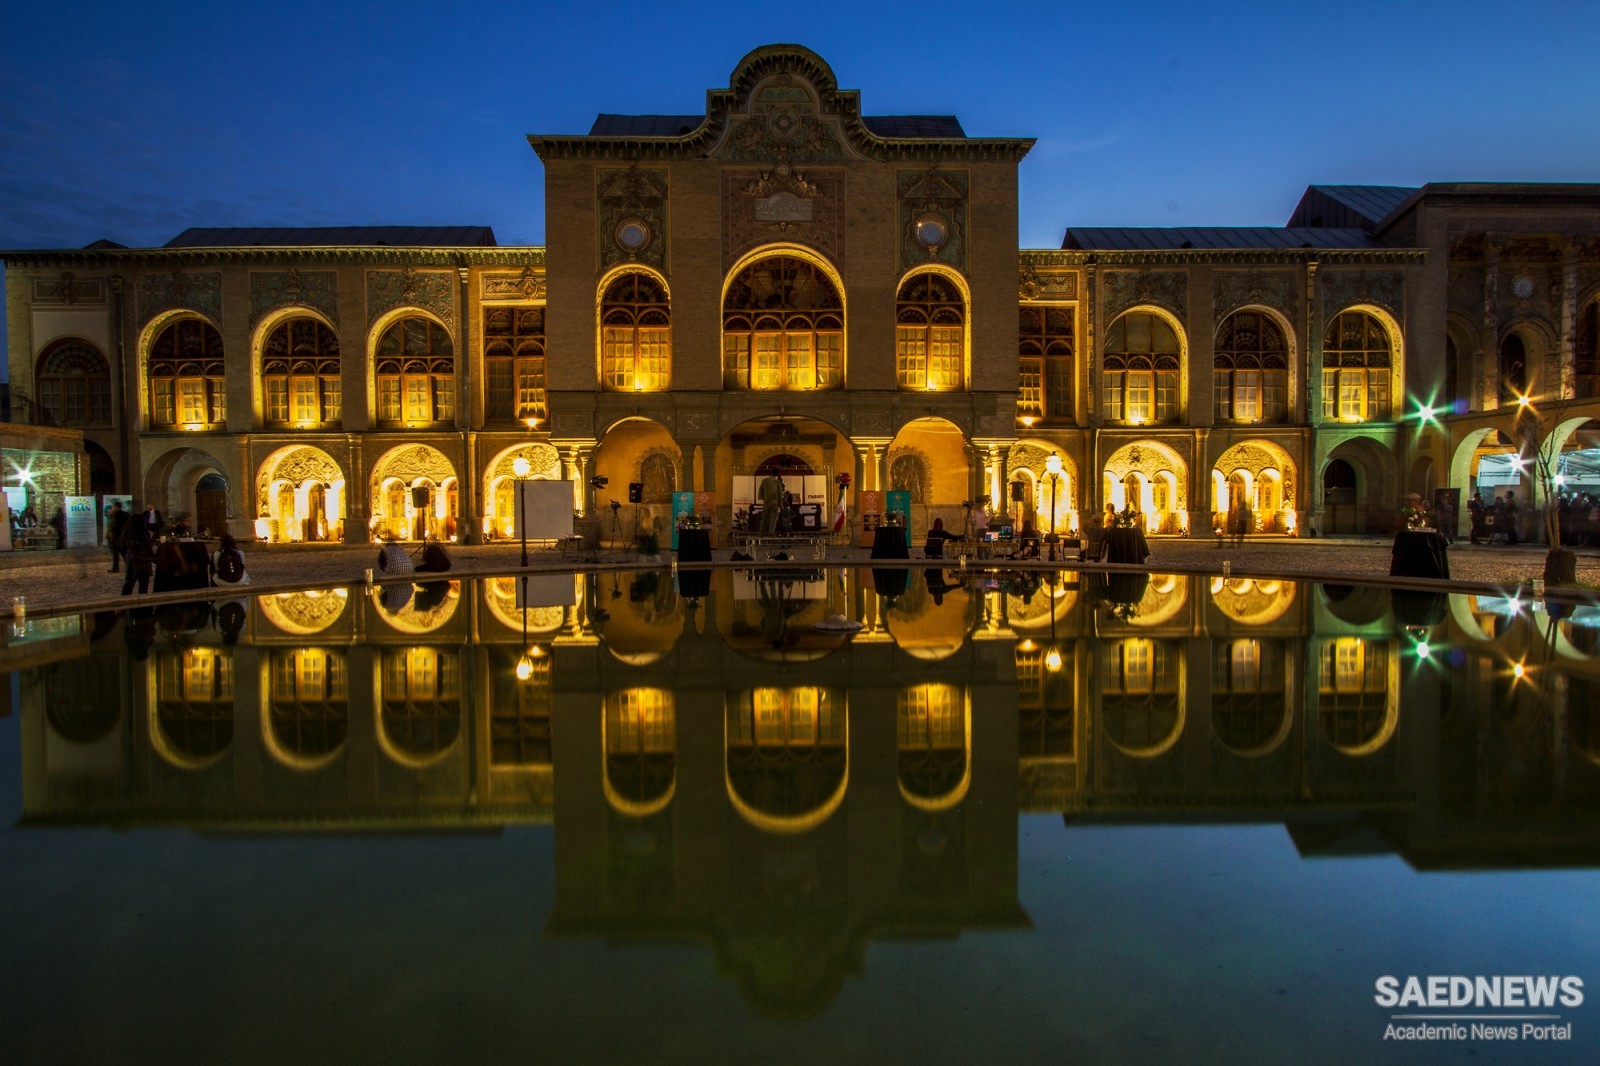 Masoudieh Palace: Qajar Architecture and Art